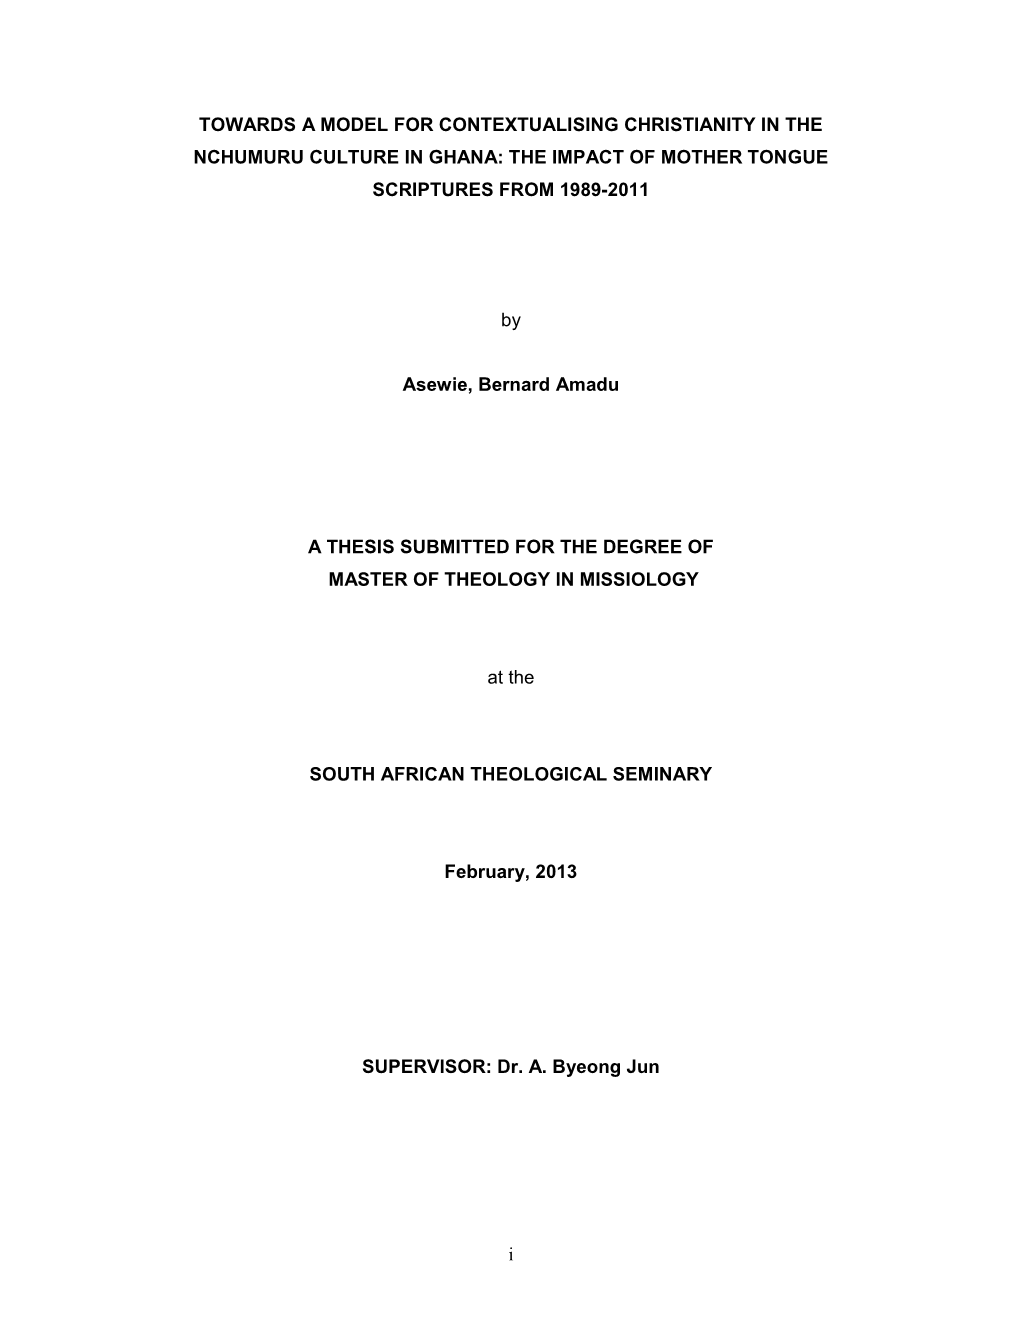 Download Thesis